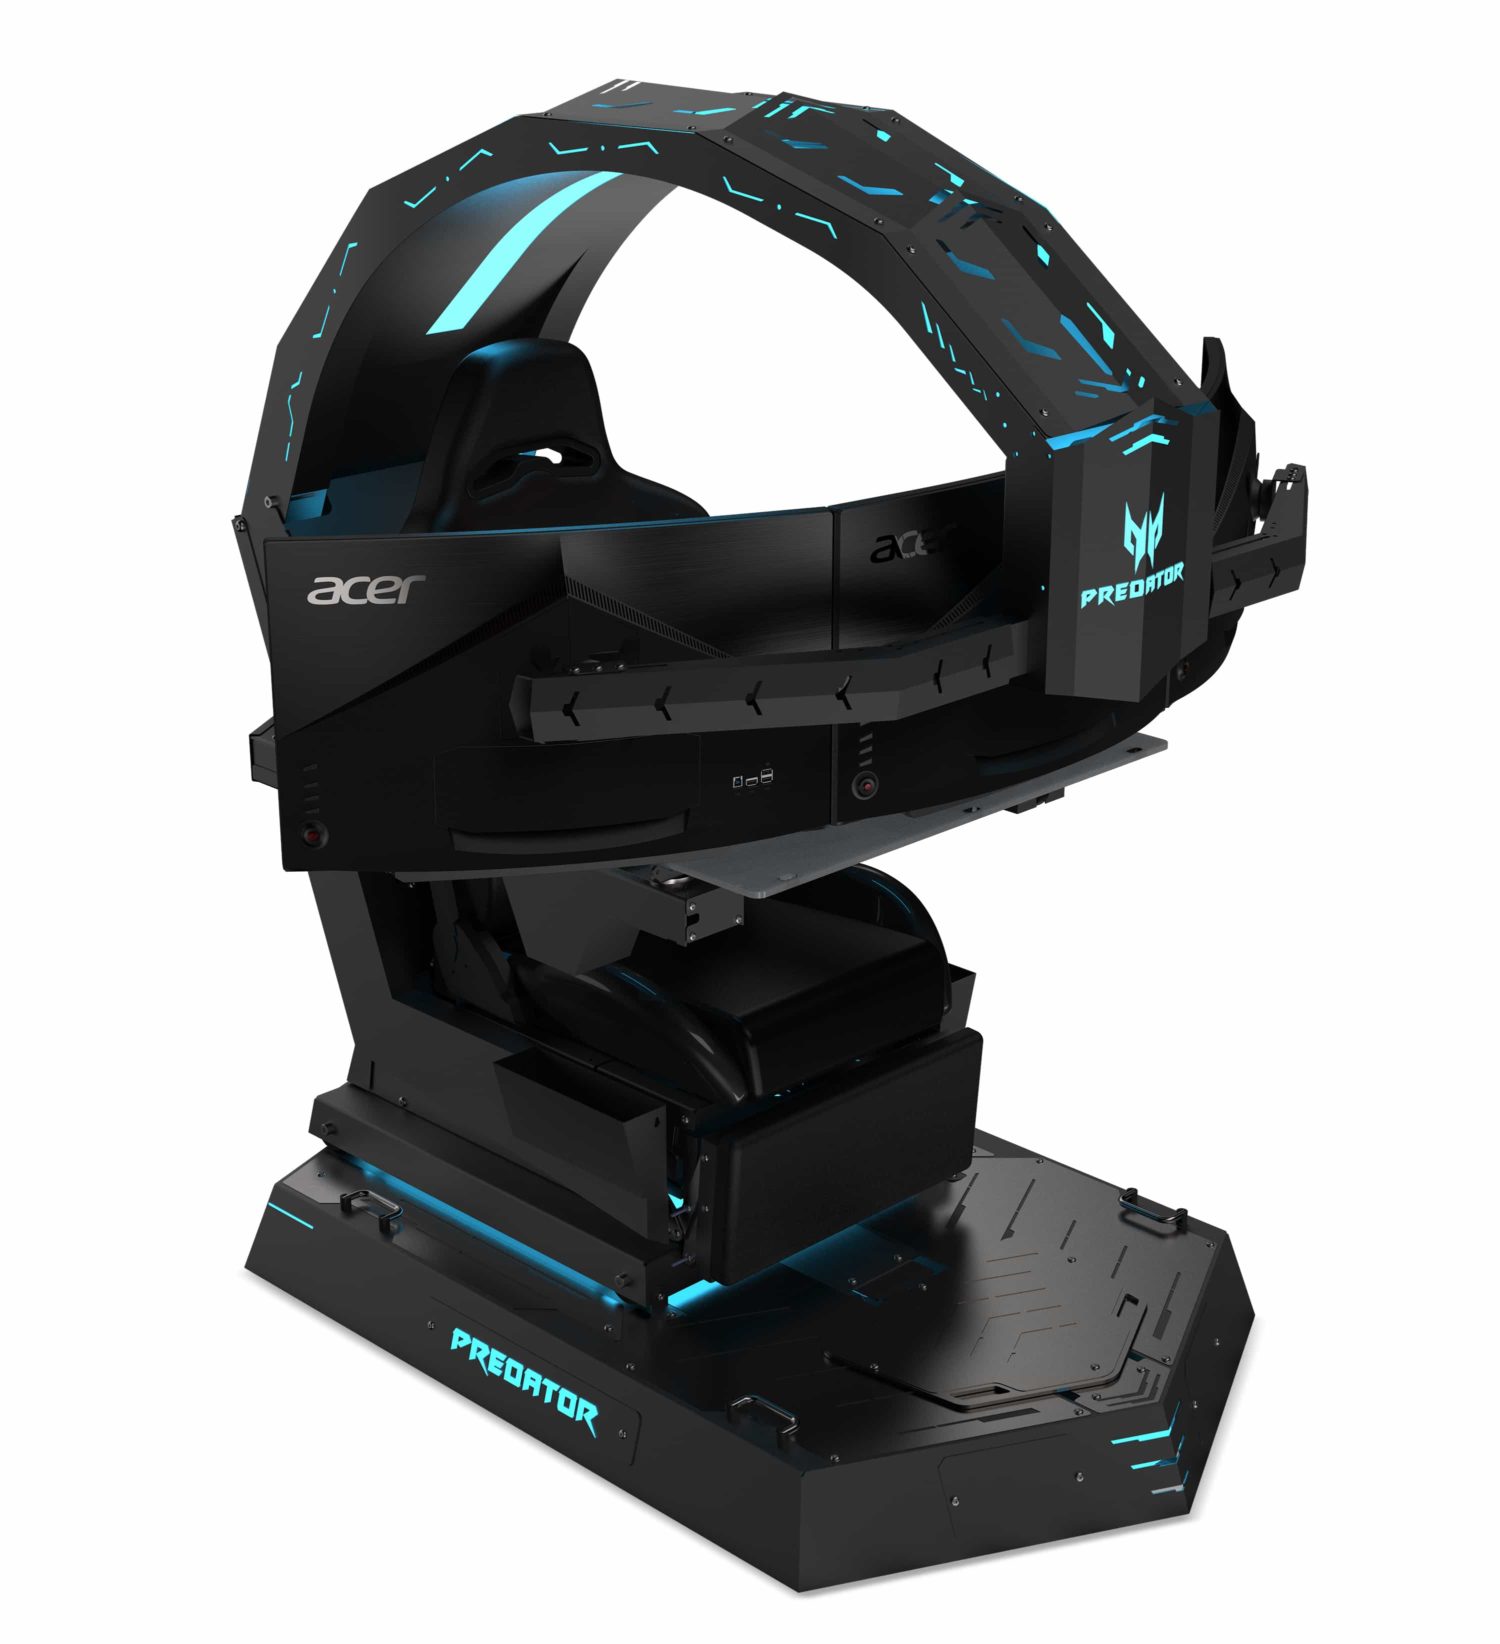 Acer Predator Thronos gaming chair launched